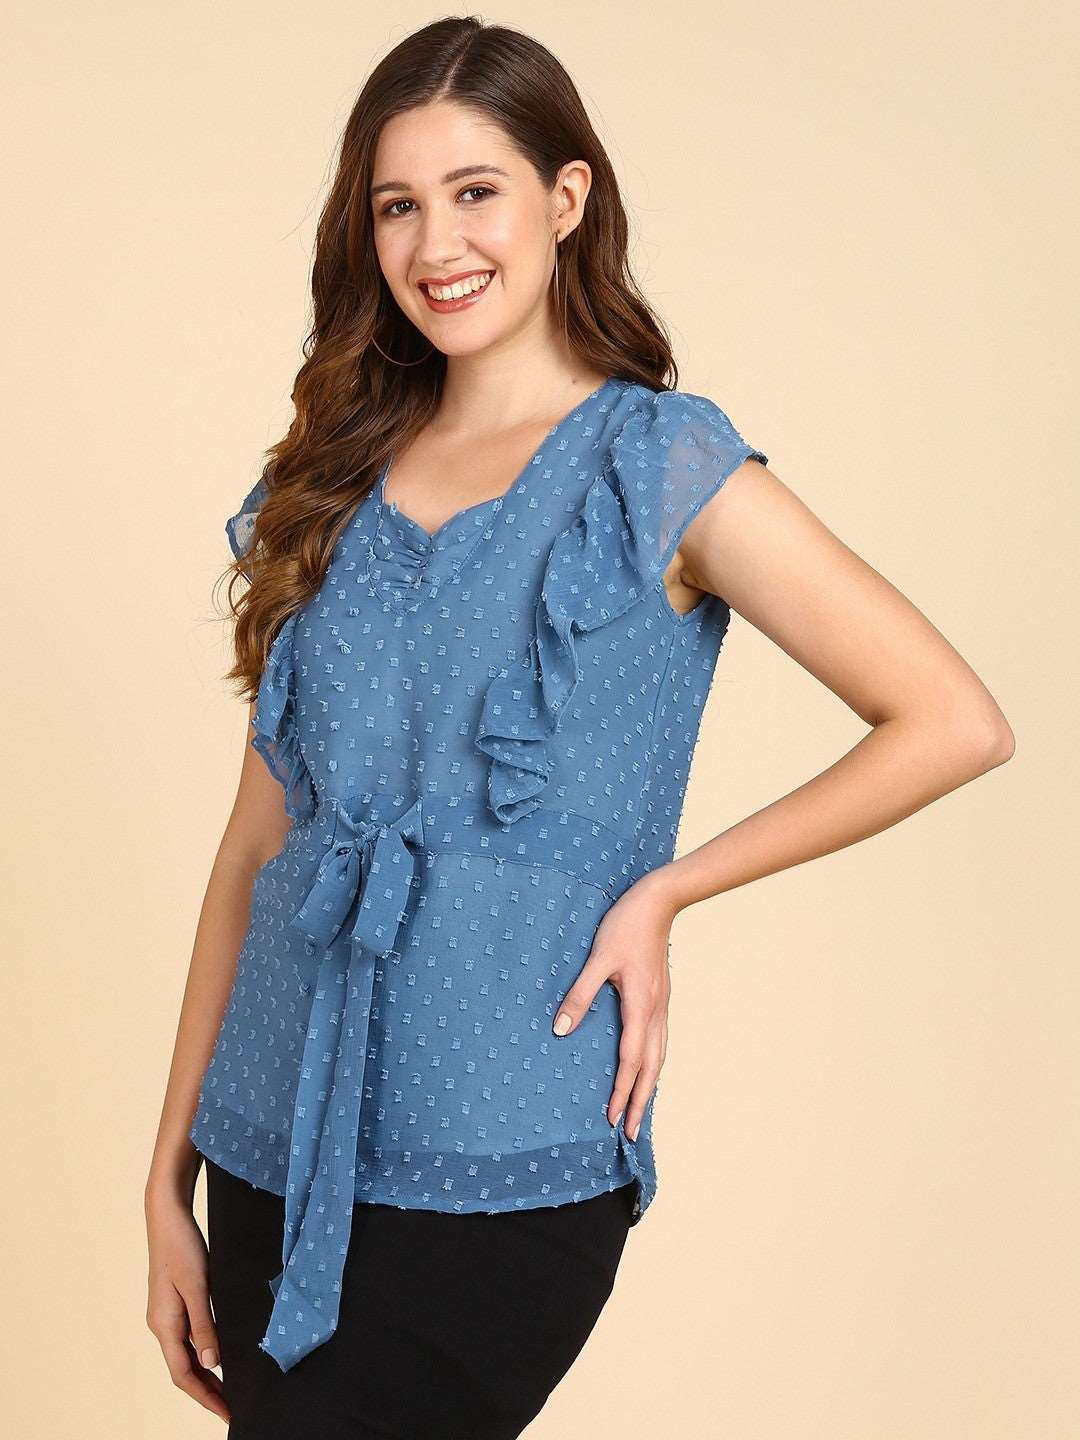 The model in the image is wearing Casual Self Design Women Blue Sweetheart Neck Top from Alice Milan. Crafted with the finest materials and impeccable attention to detail, the Western Wear Top looks premium, trendy, luxurious and offers unparalleled comfort. It’s a perfect clothing option for loungewear, resort wear, party wear or for an airport look. The woman in the image looks happy, and confident with her style statement putting a happy smile on her face.